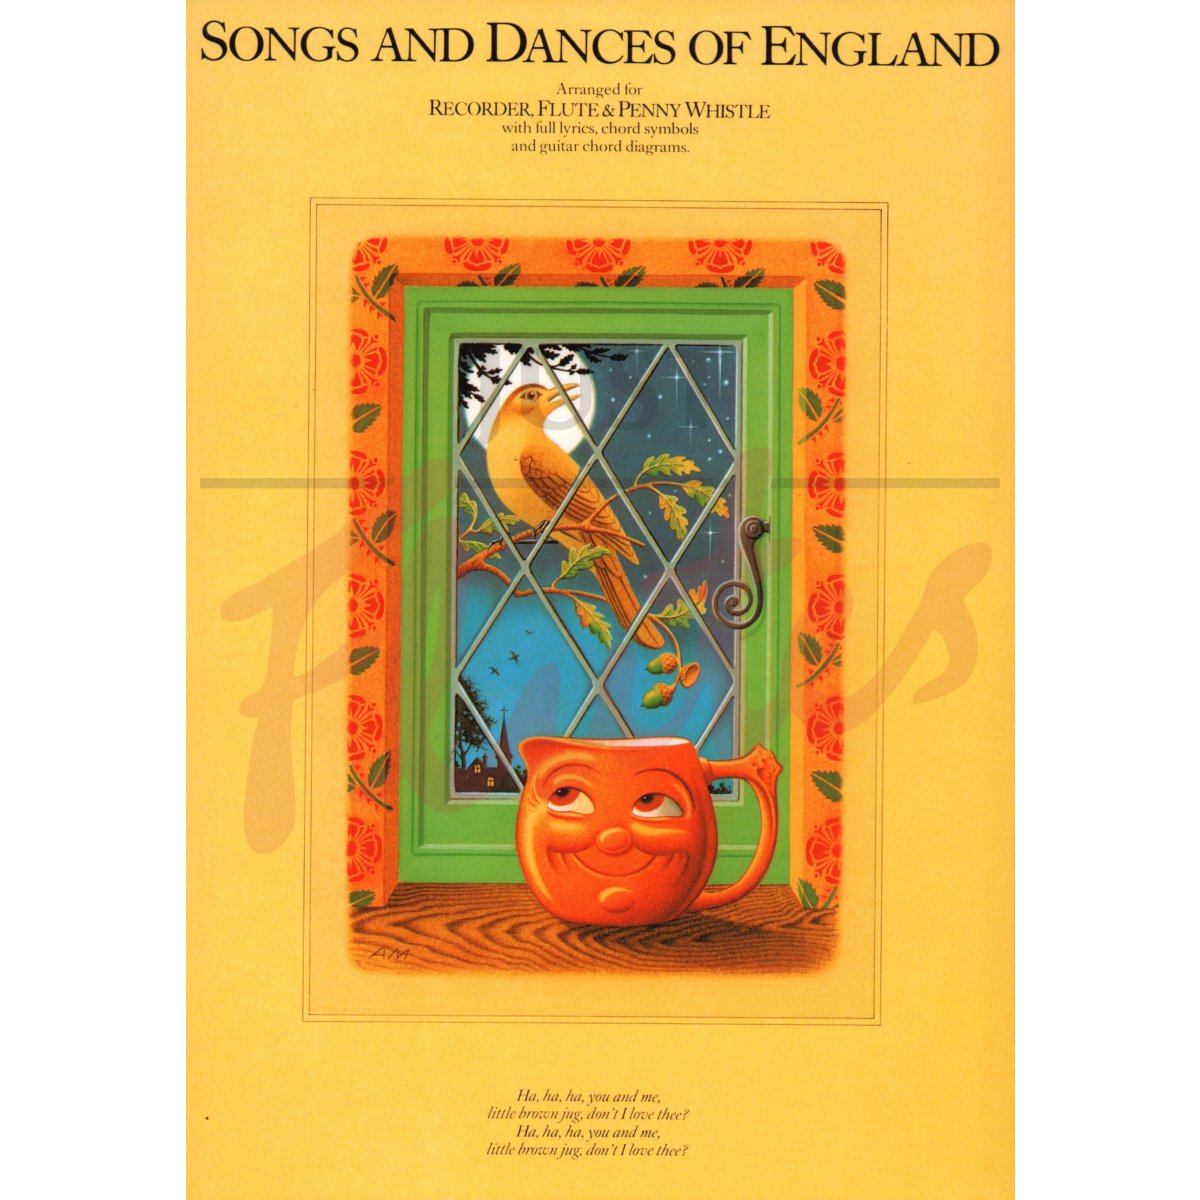 Songs and Dances of England arranged for Flute, Recorder or Penny Whistle